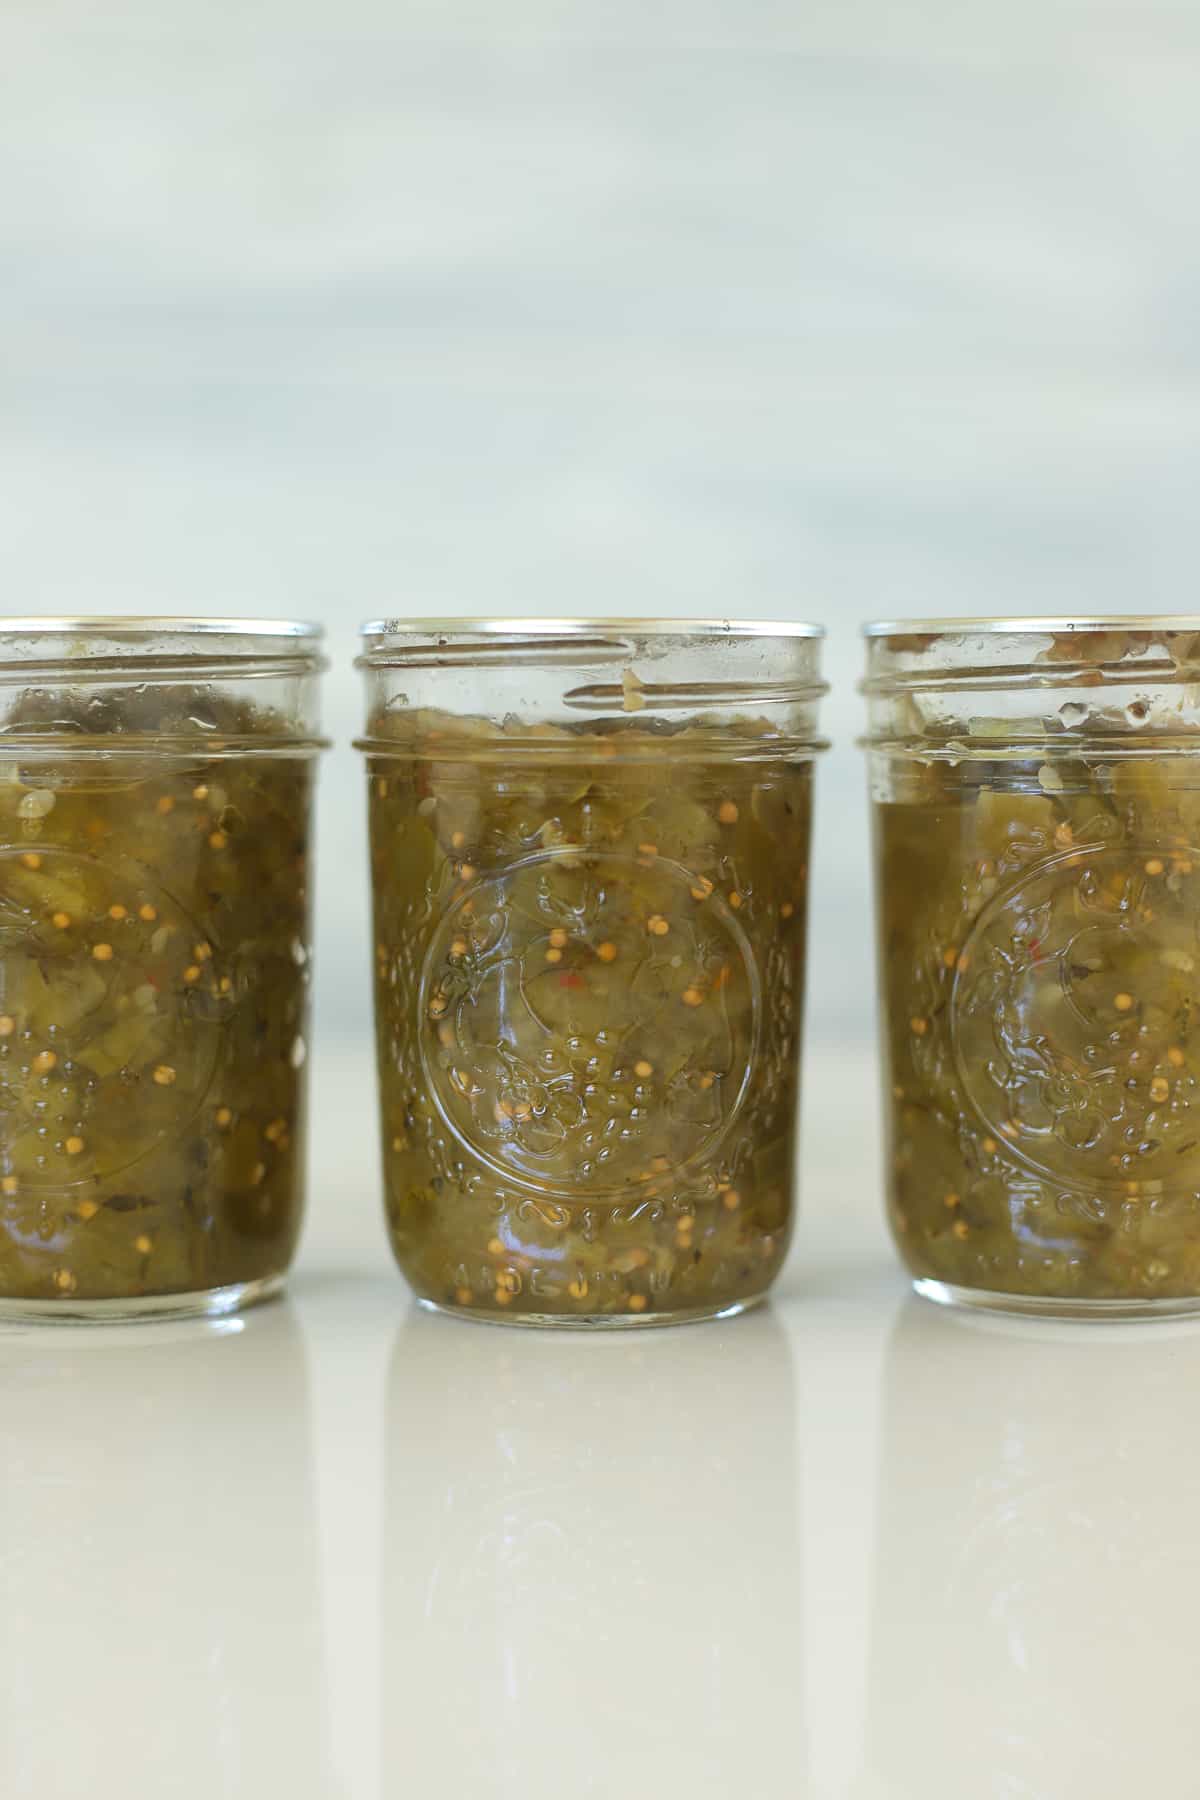 3 jars of zucchini relish on a white table